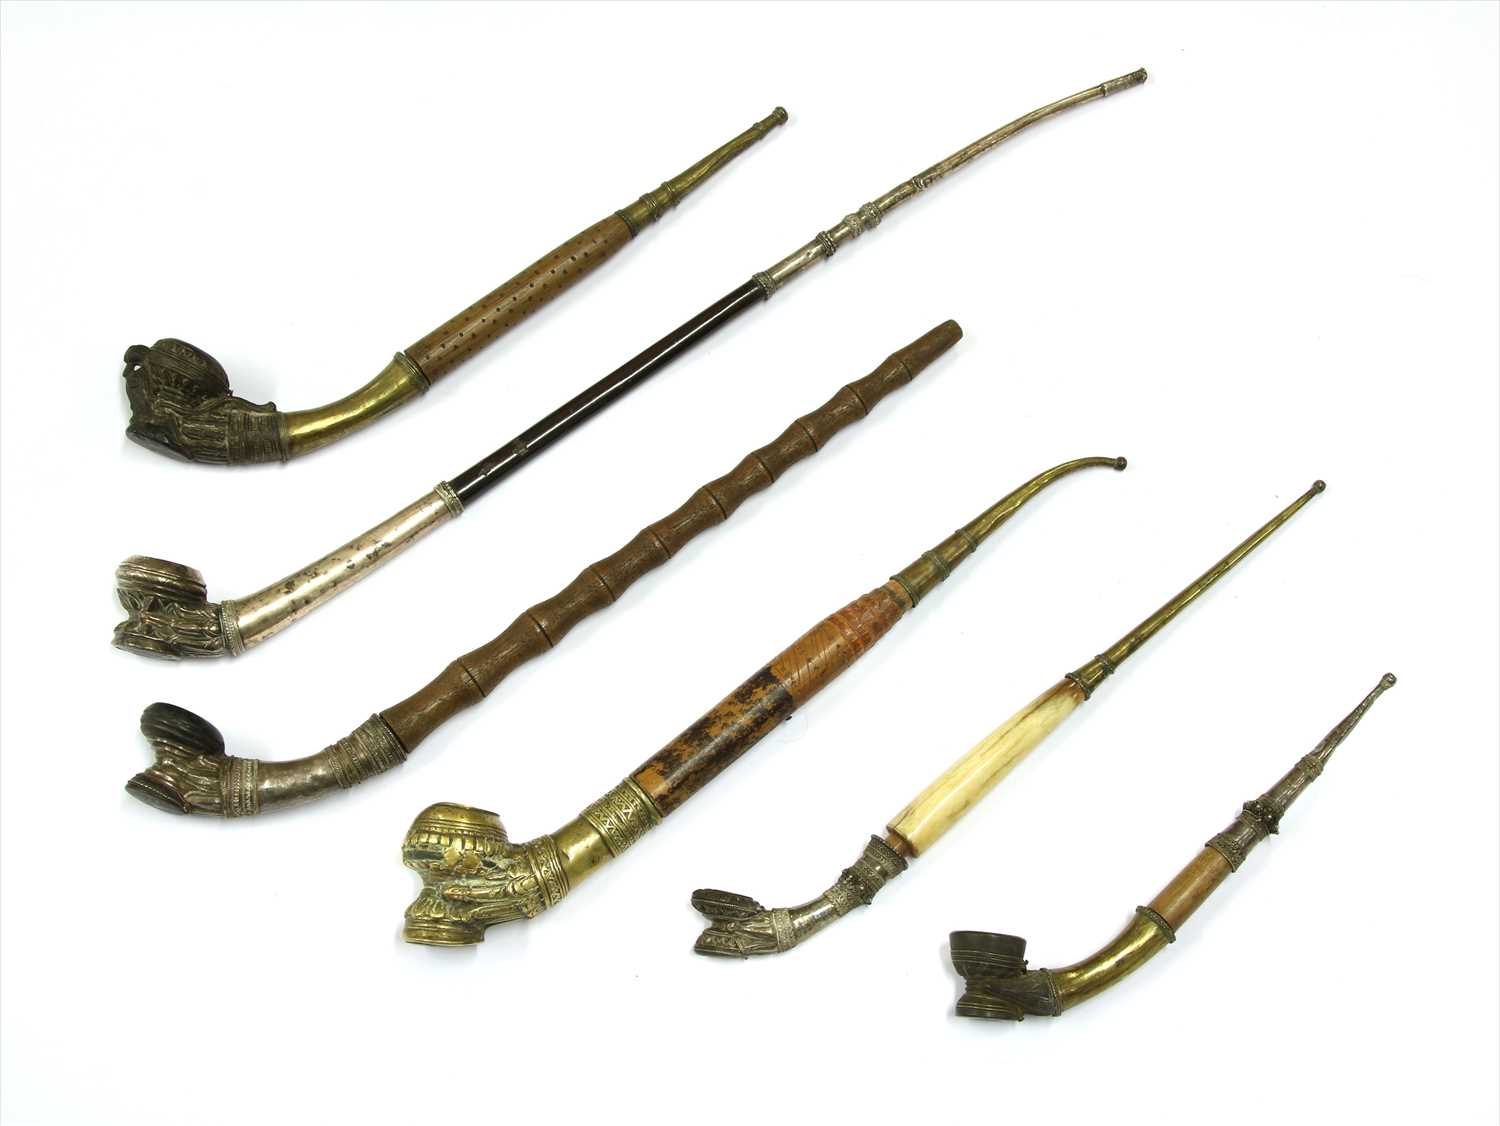 Lot 4 - Six Burmese clay-mounted pipes